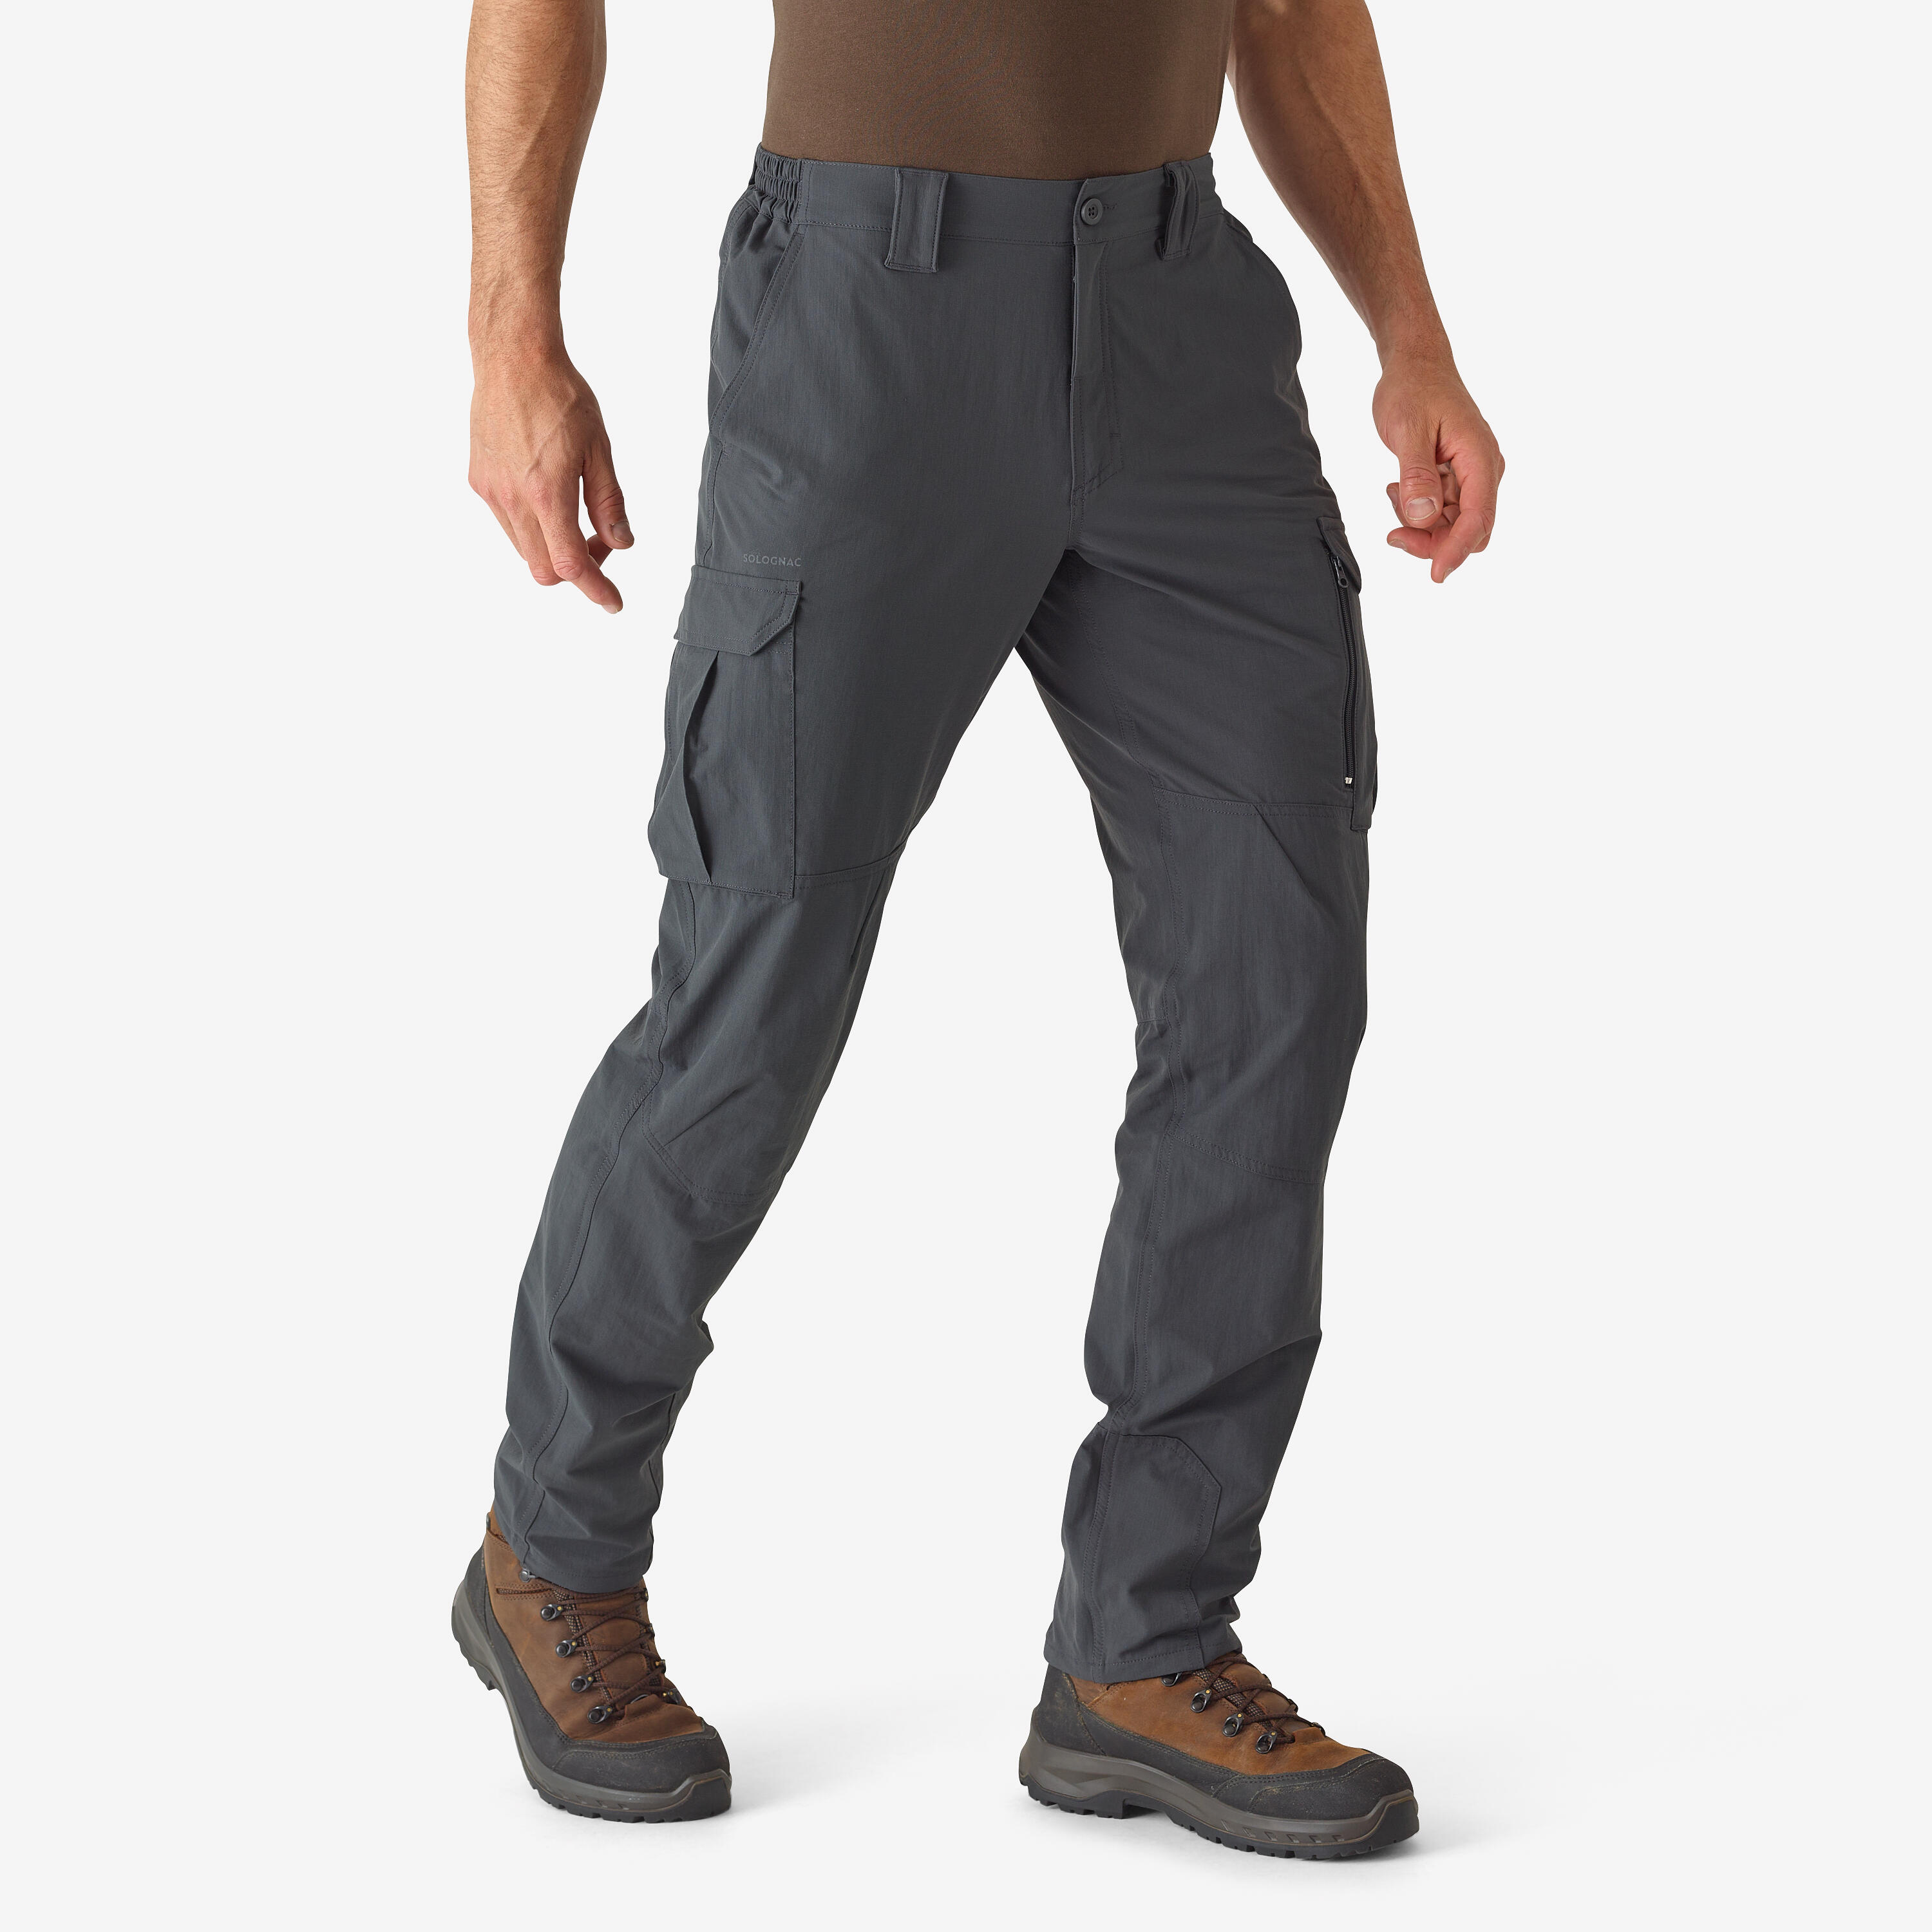 Buy Men's Outdoor Casual Loose Multi Pocket Cargo Pants Solid Military  Athletic-Fit Trousers by Summer, Dark Gray, 40 Regular at Amazon.in